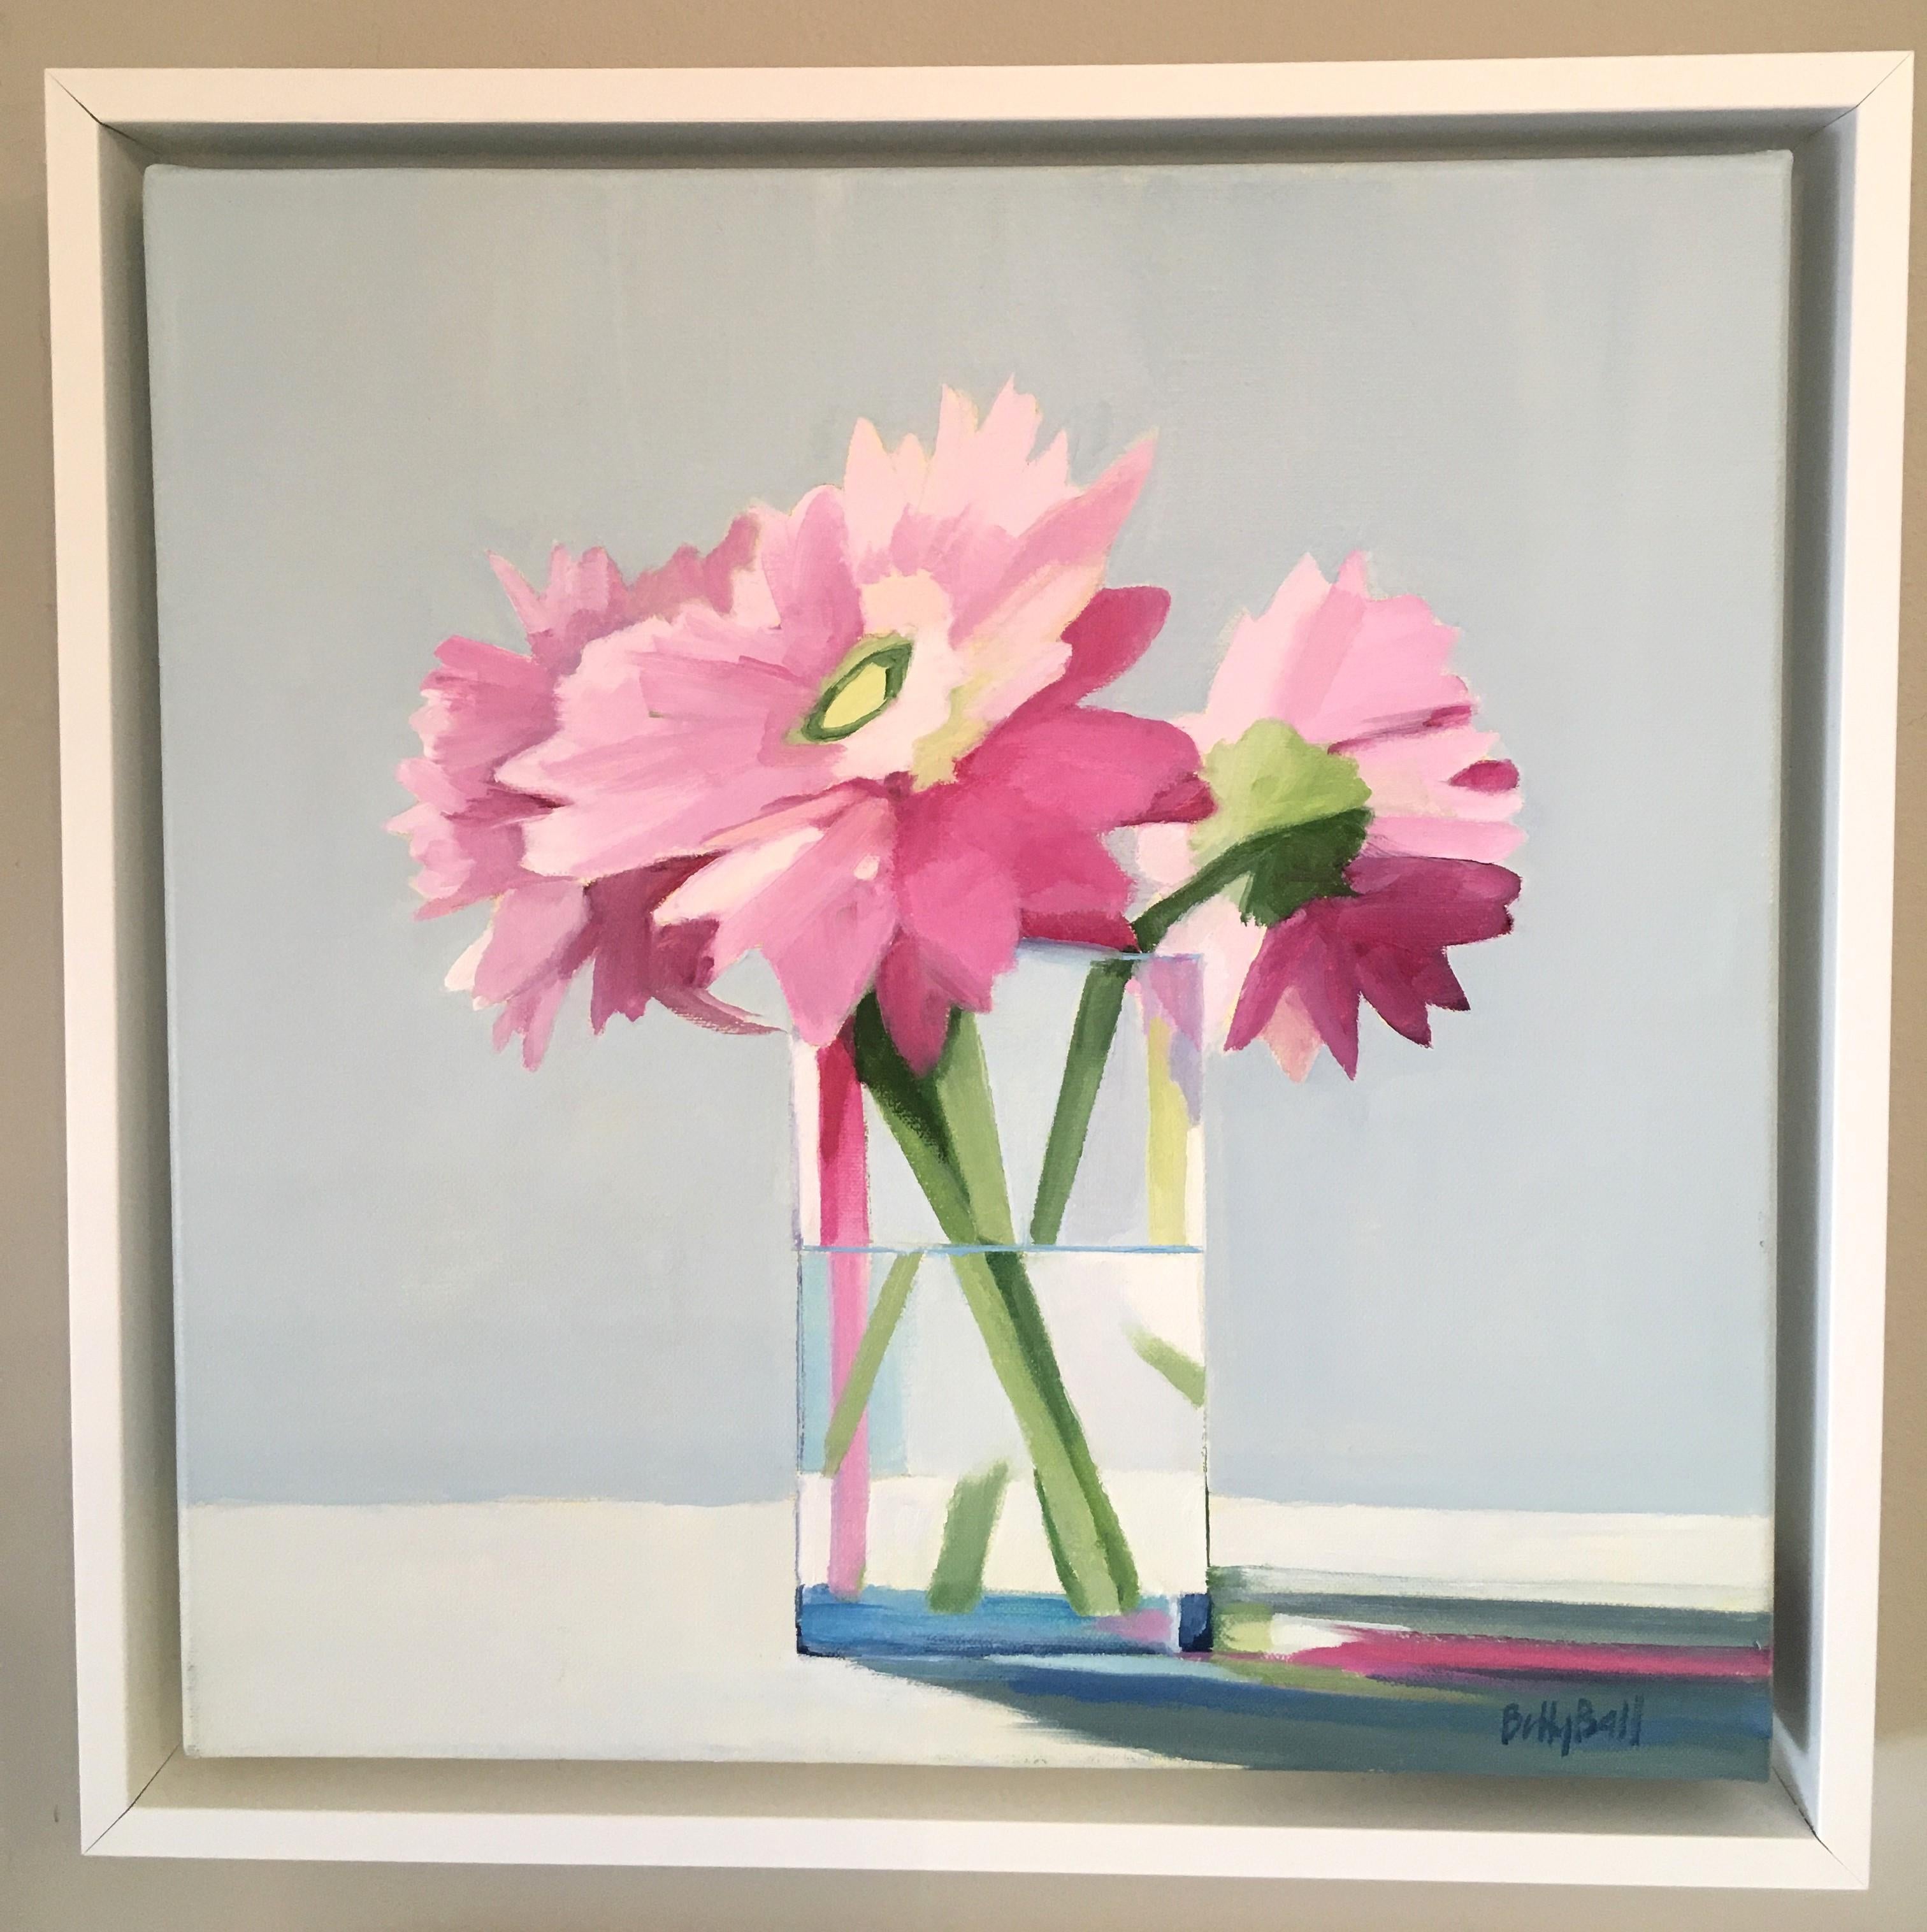 Think Pink by Betty Ball is part of her Flower series.  It is Oil on Linen, 12x12.  It is framed to 13.5 x 13.5  It is $875.  It is a beautiful group of flowers in a vase with water.  A perfect Mother's day gift of forever flowers.

Betty Ball